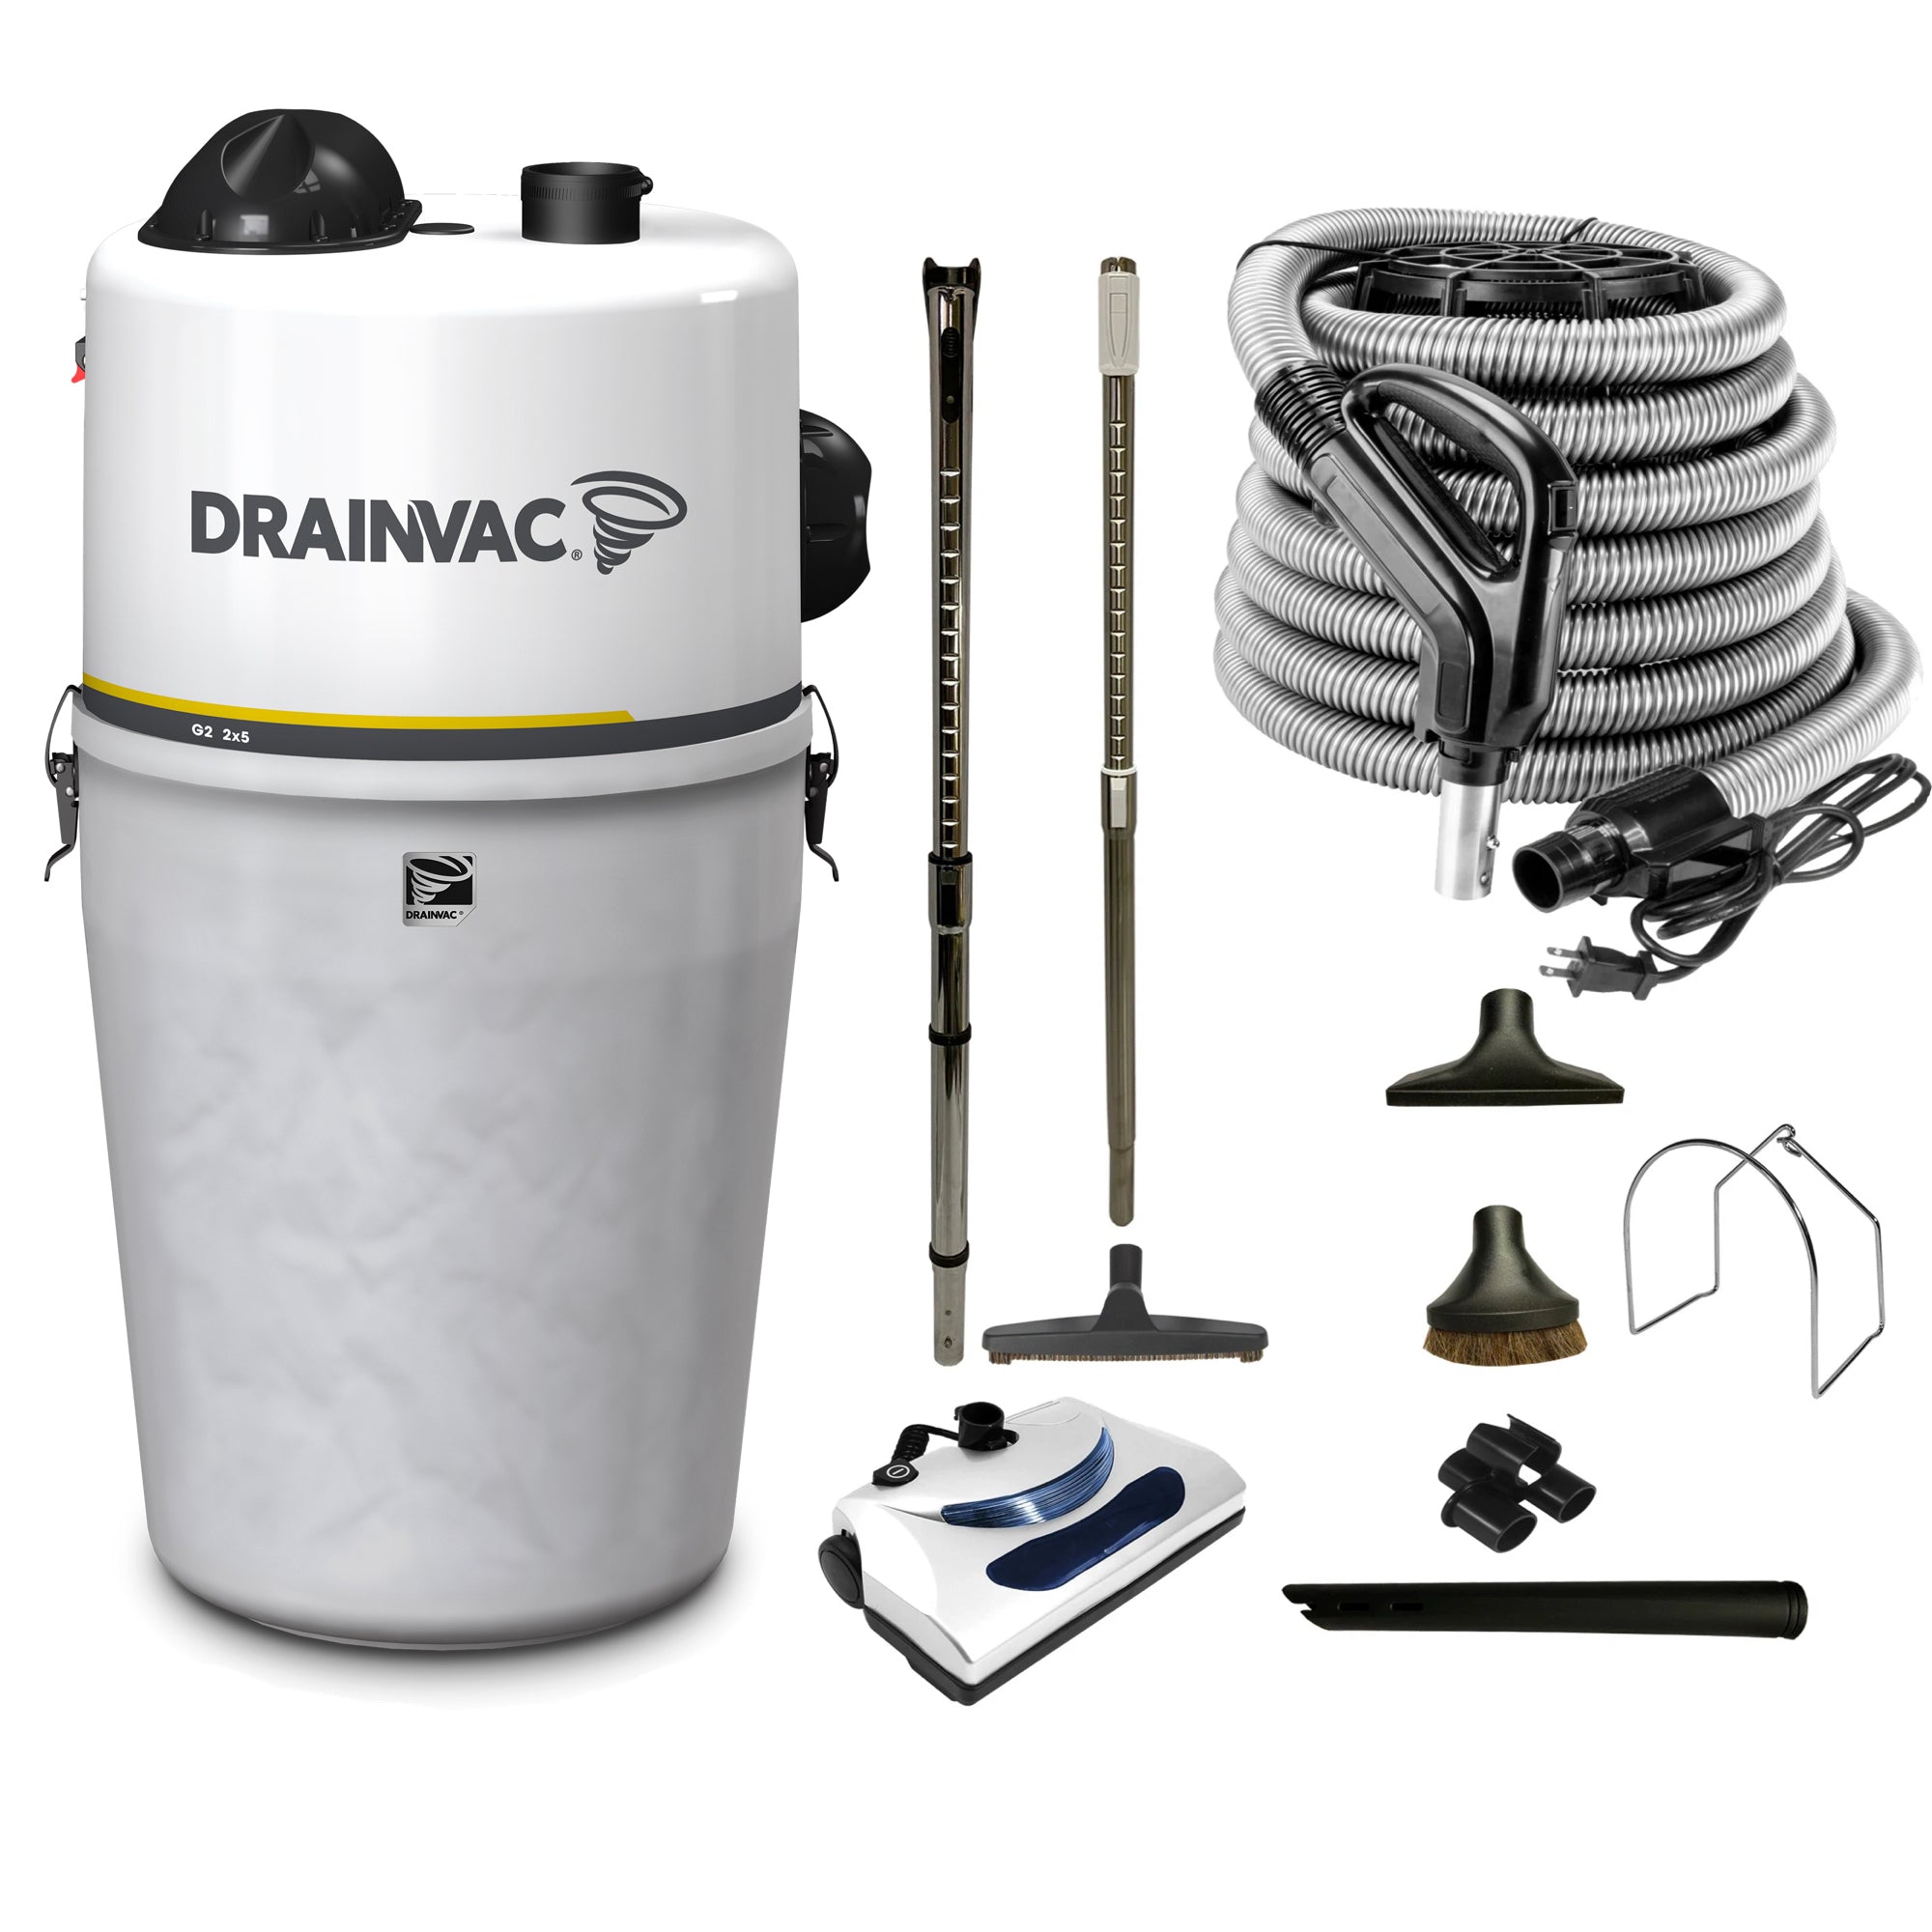 DrainVac G2-2x5 Central Vacuum with Basic Electric Package